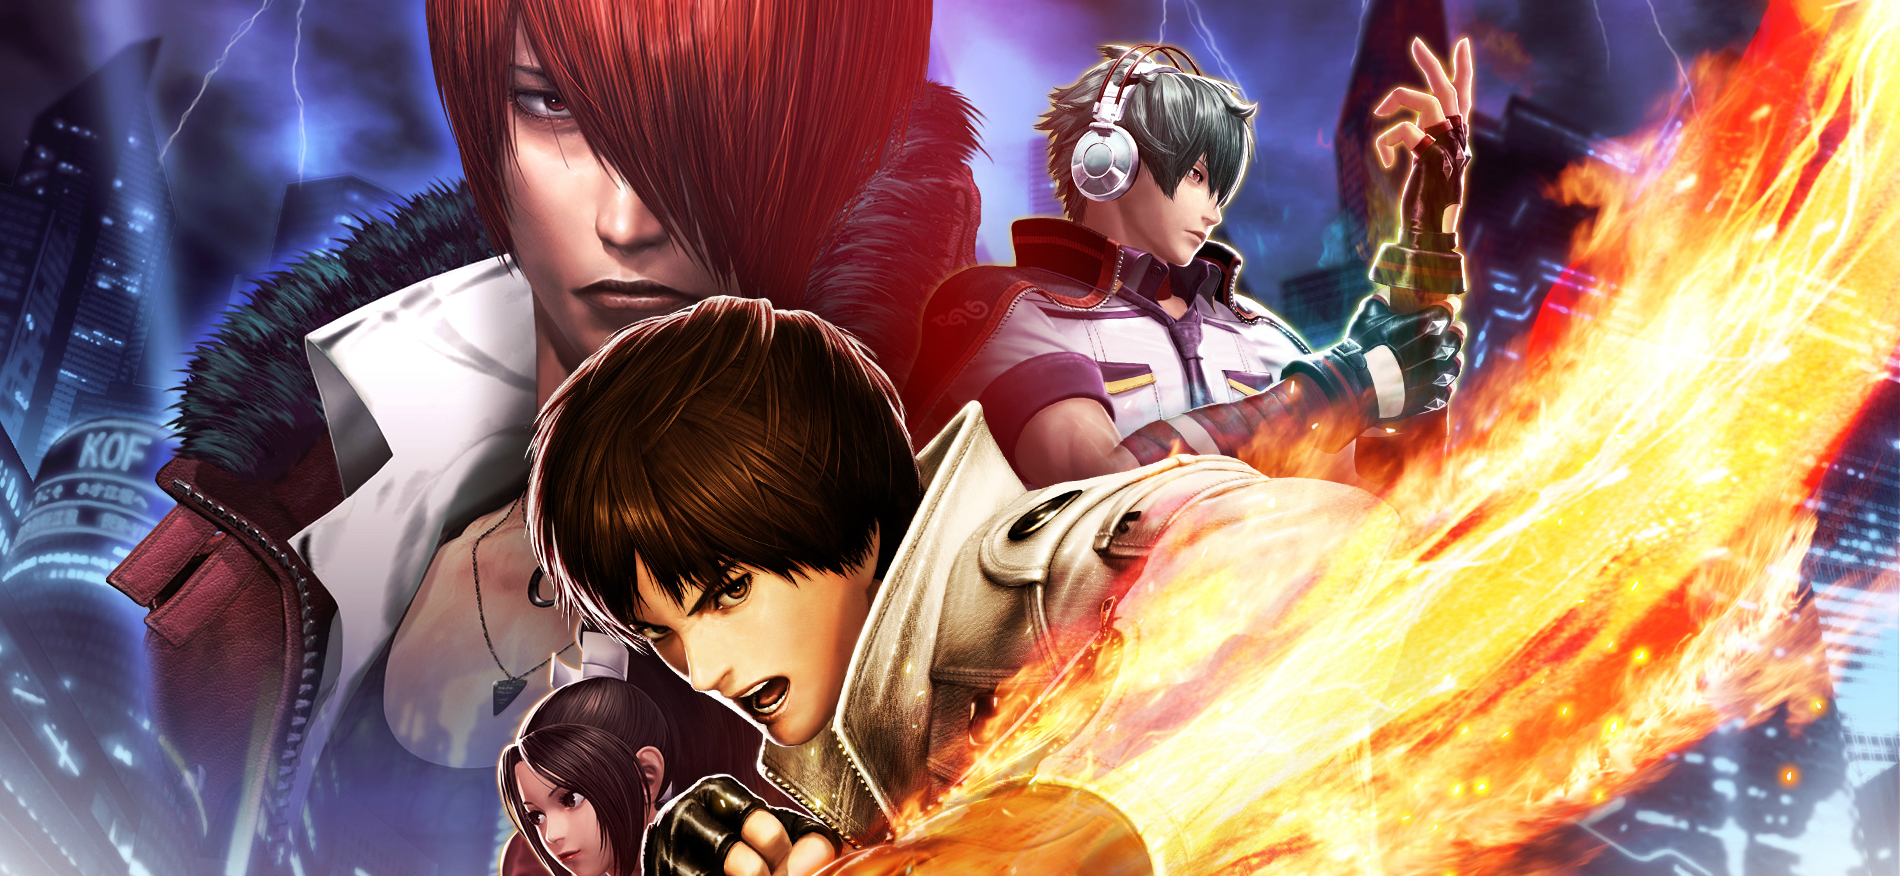 Oh God: Behind the scenes of The King of Fighters movie – Destructoid